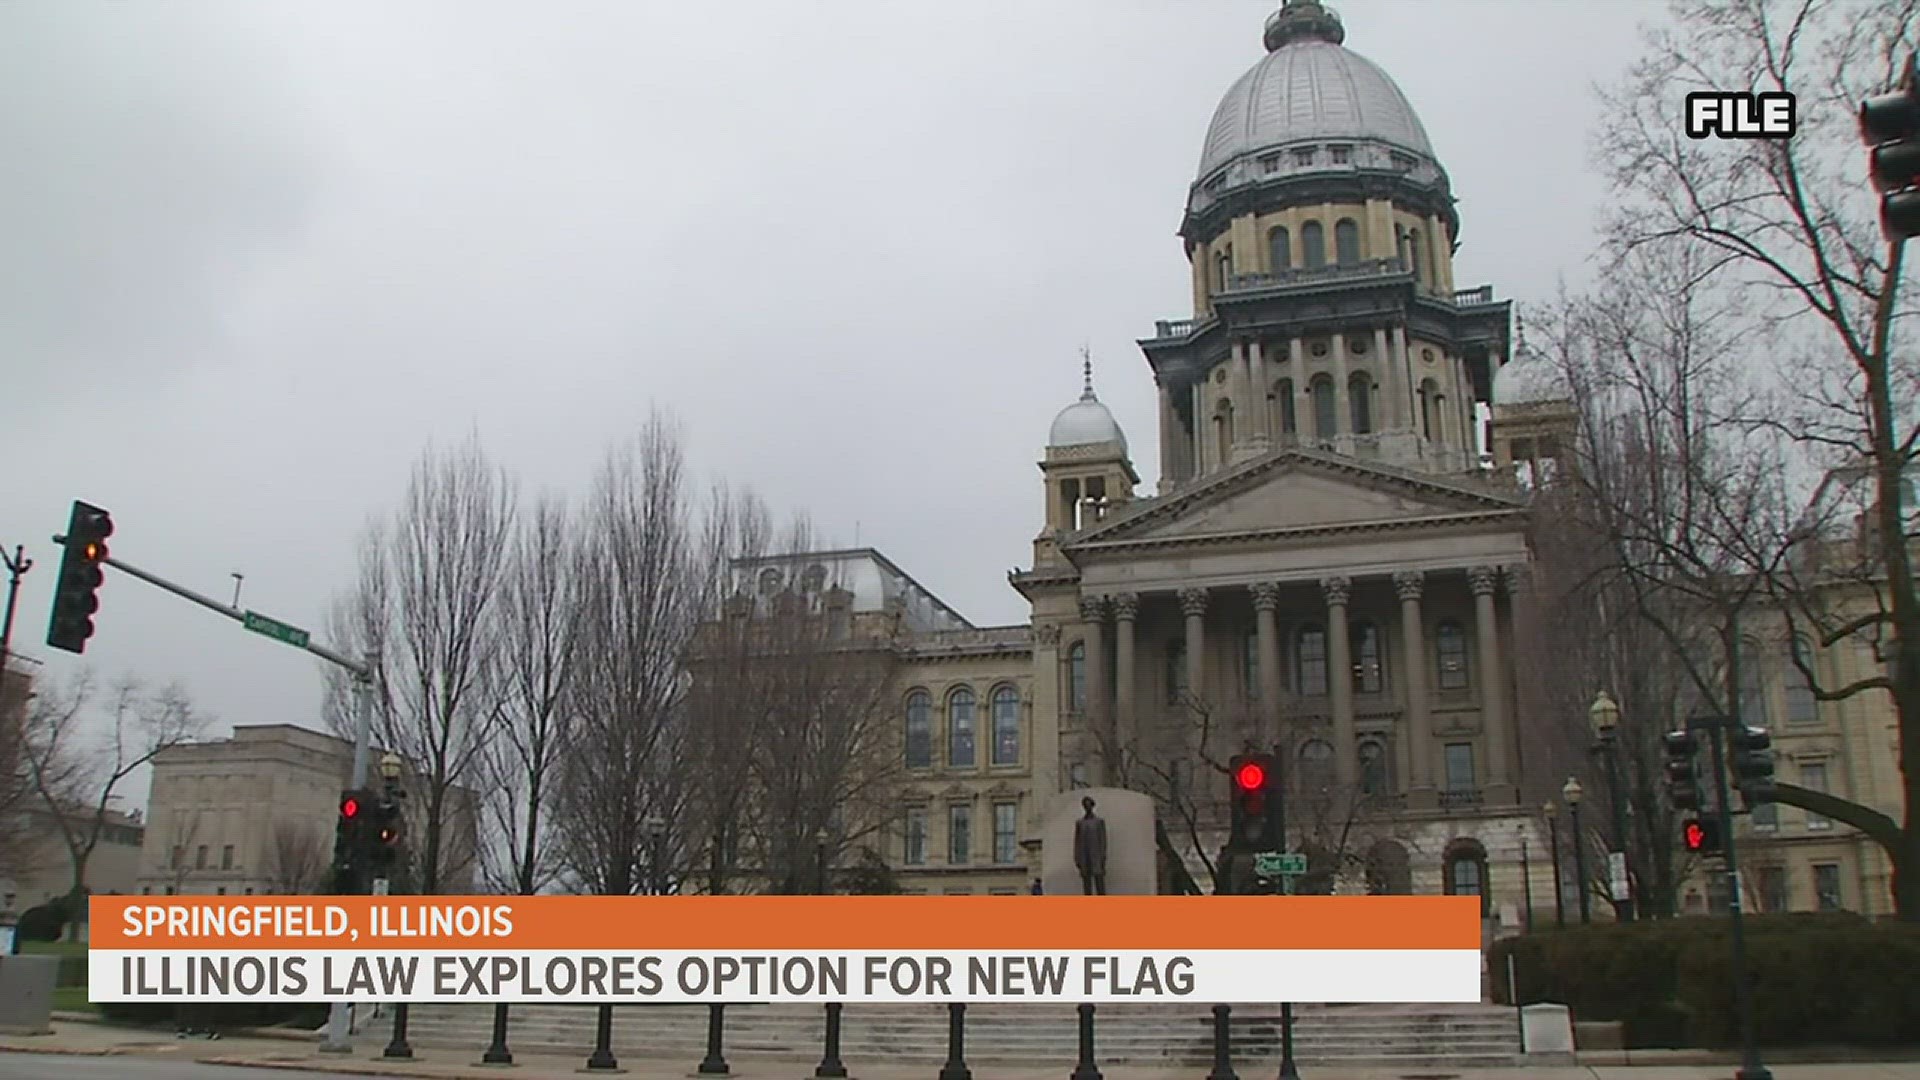 Illinois Governor Pritzker recently signed a bill which is allowing for the exploration for a new flag. The current flag has been unchanged since the 1970's.